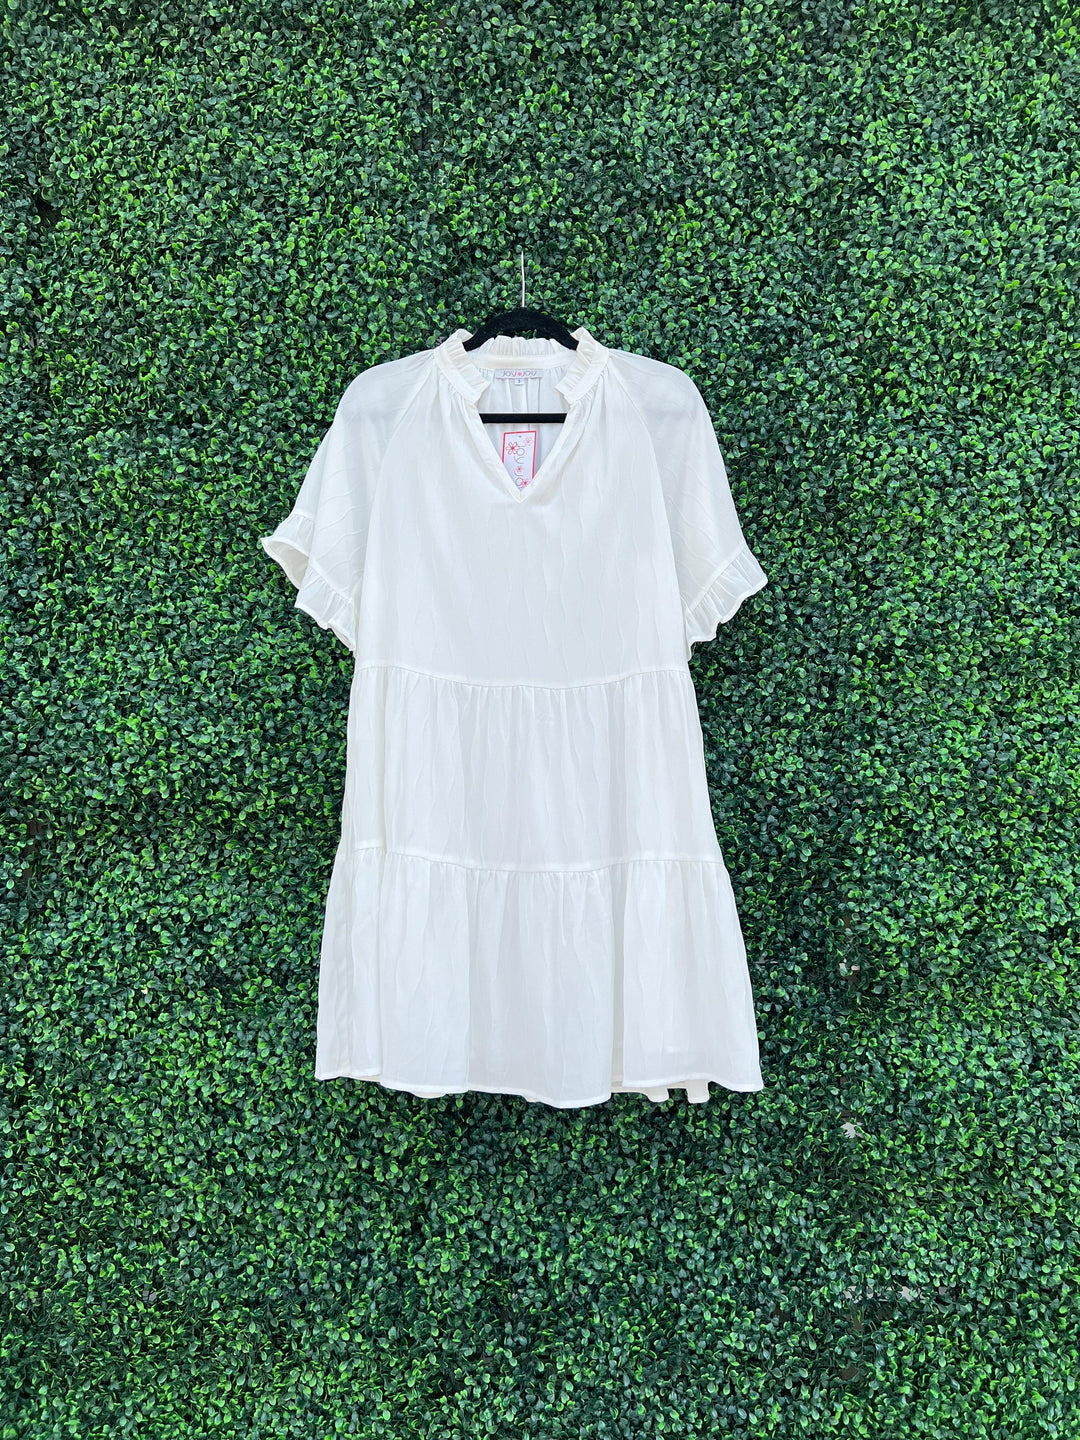 White version of the Tres Chic Flounce Dress that was shown on Wear it Wednesday Instagram segment